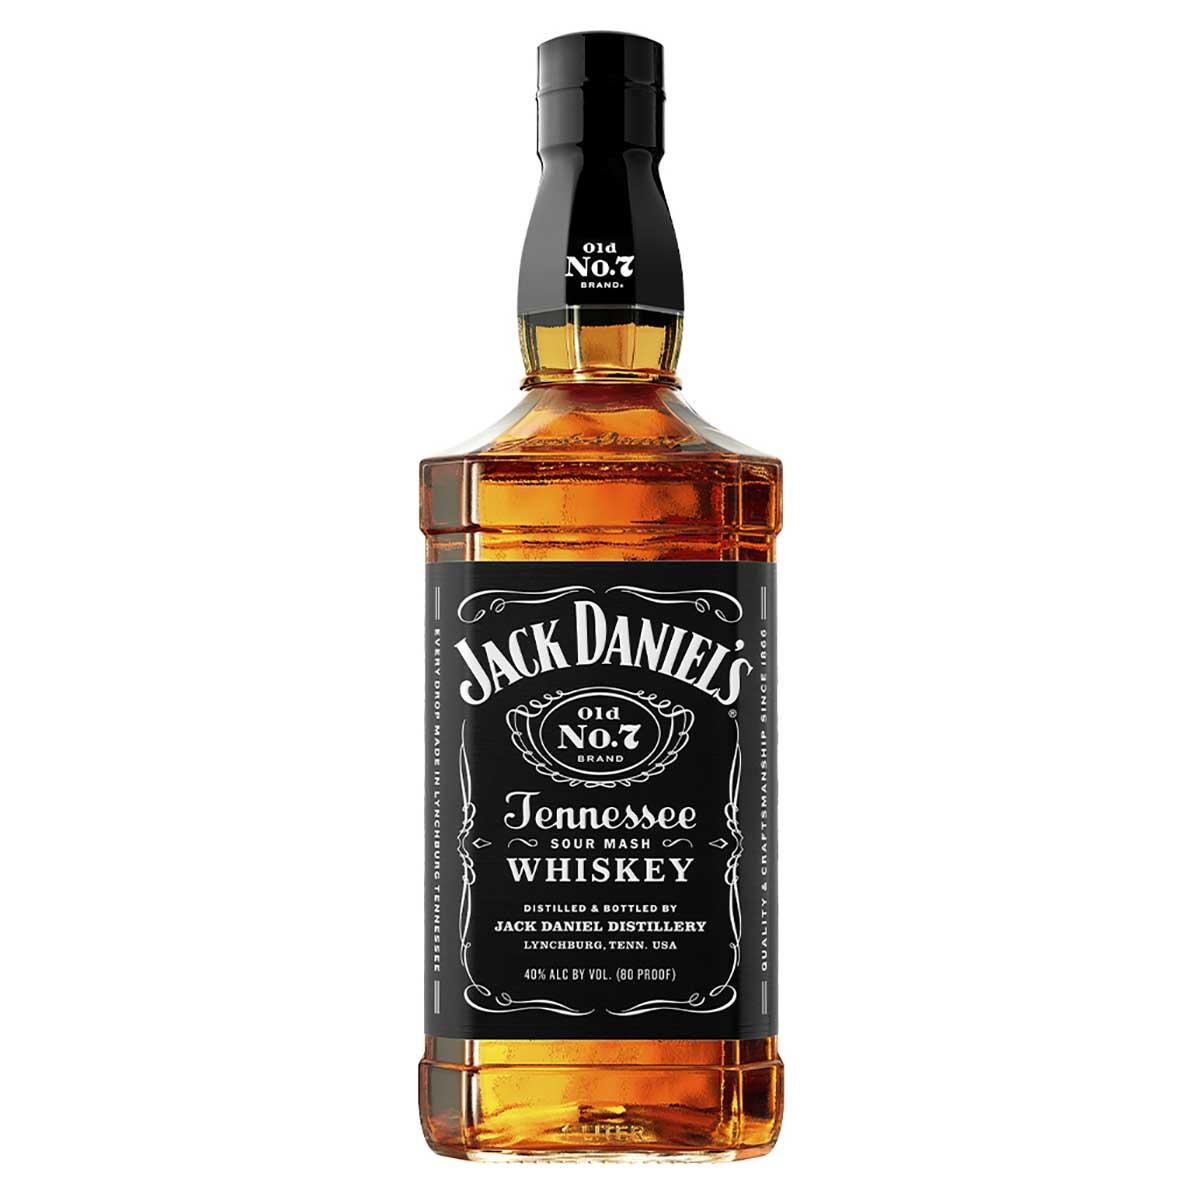 Whisky Jack Daniels Old No 7 Tennessee Whiskey 1L